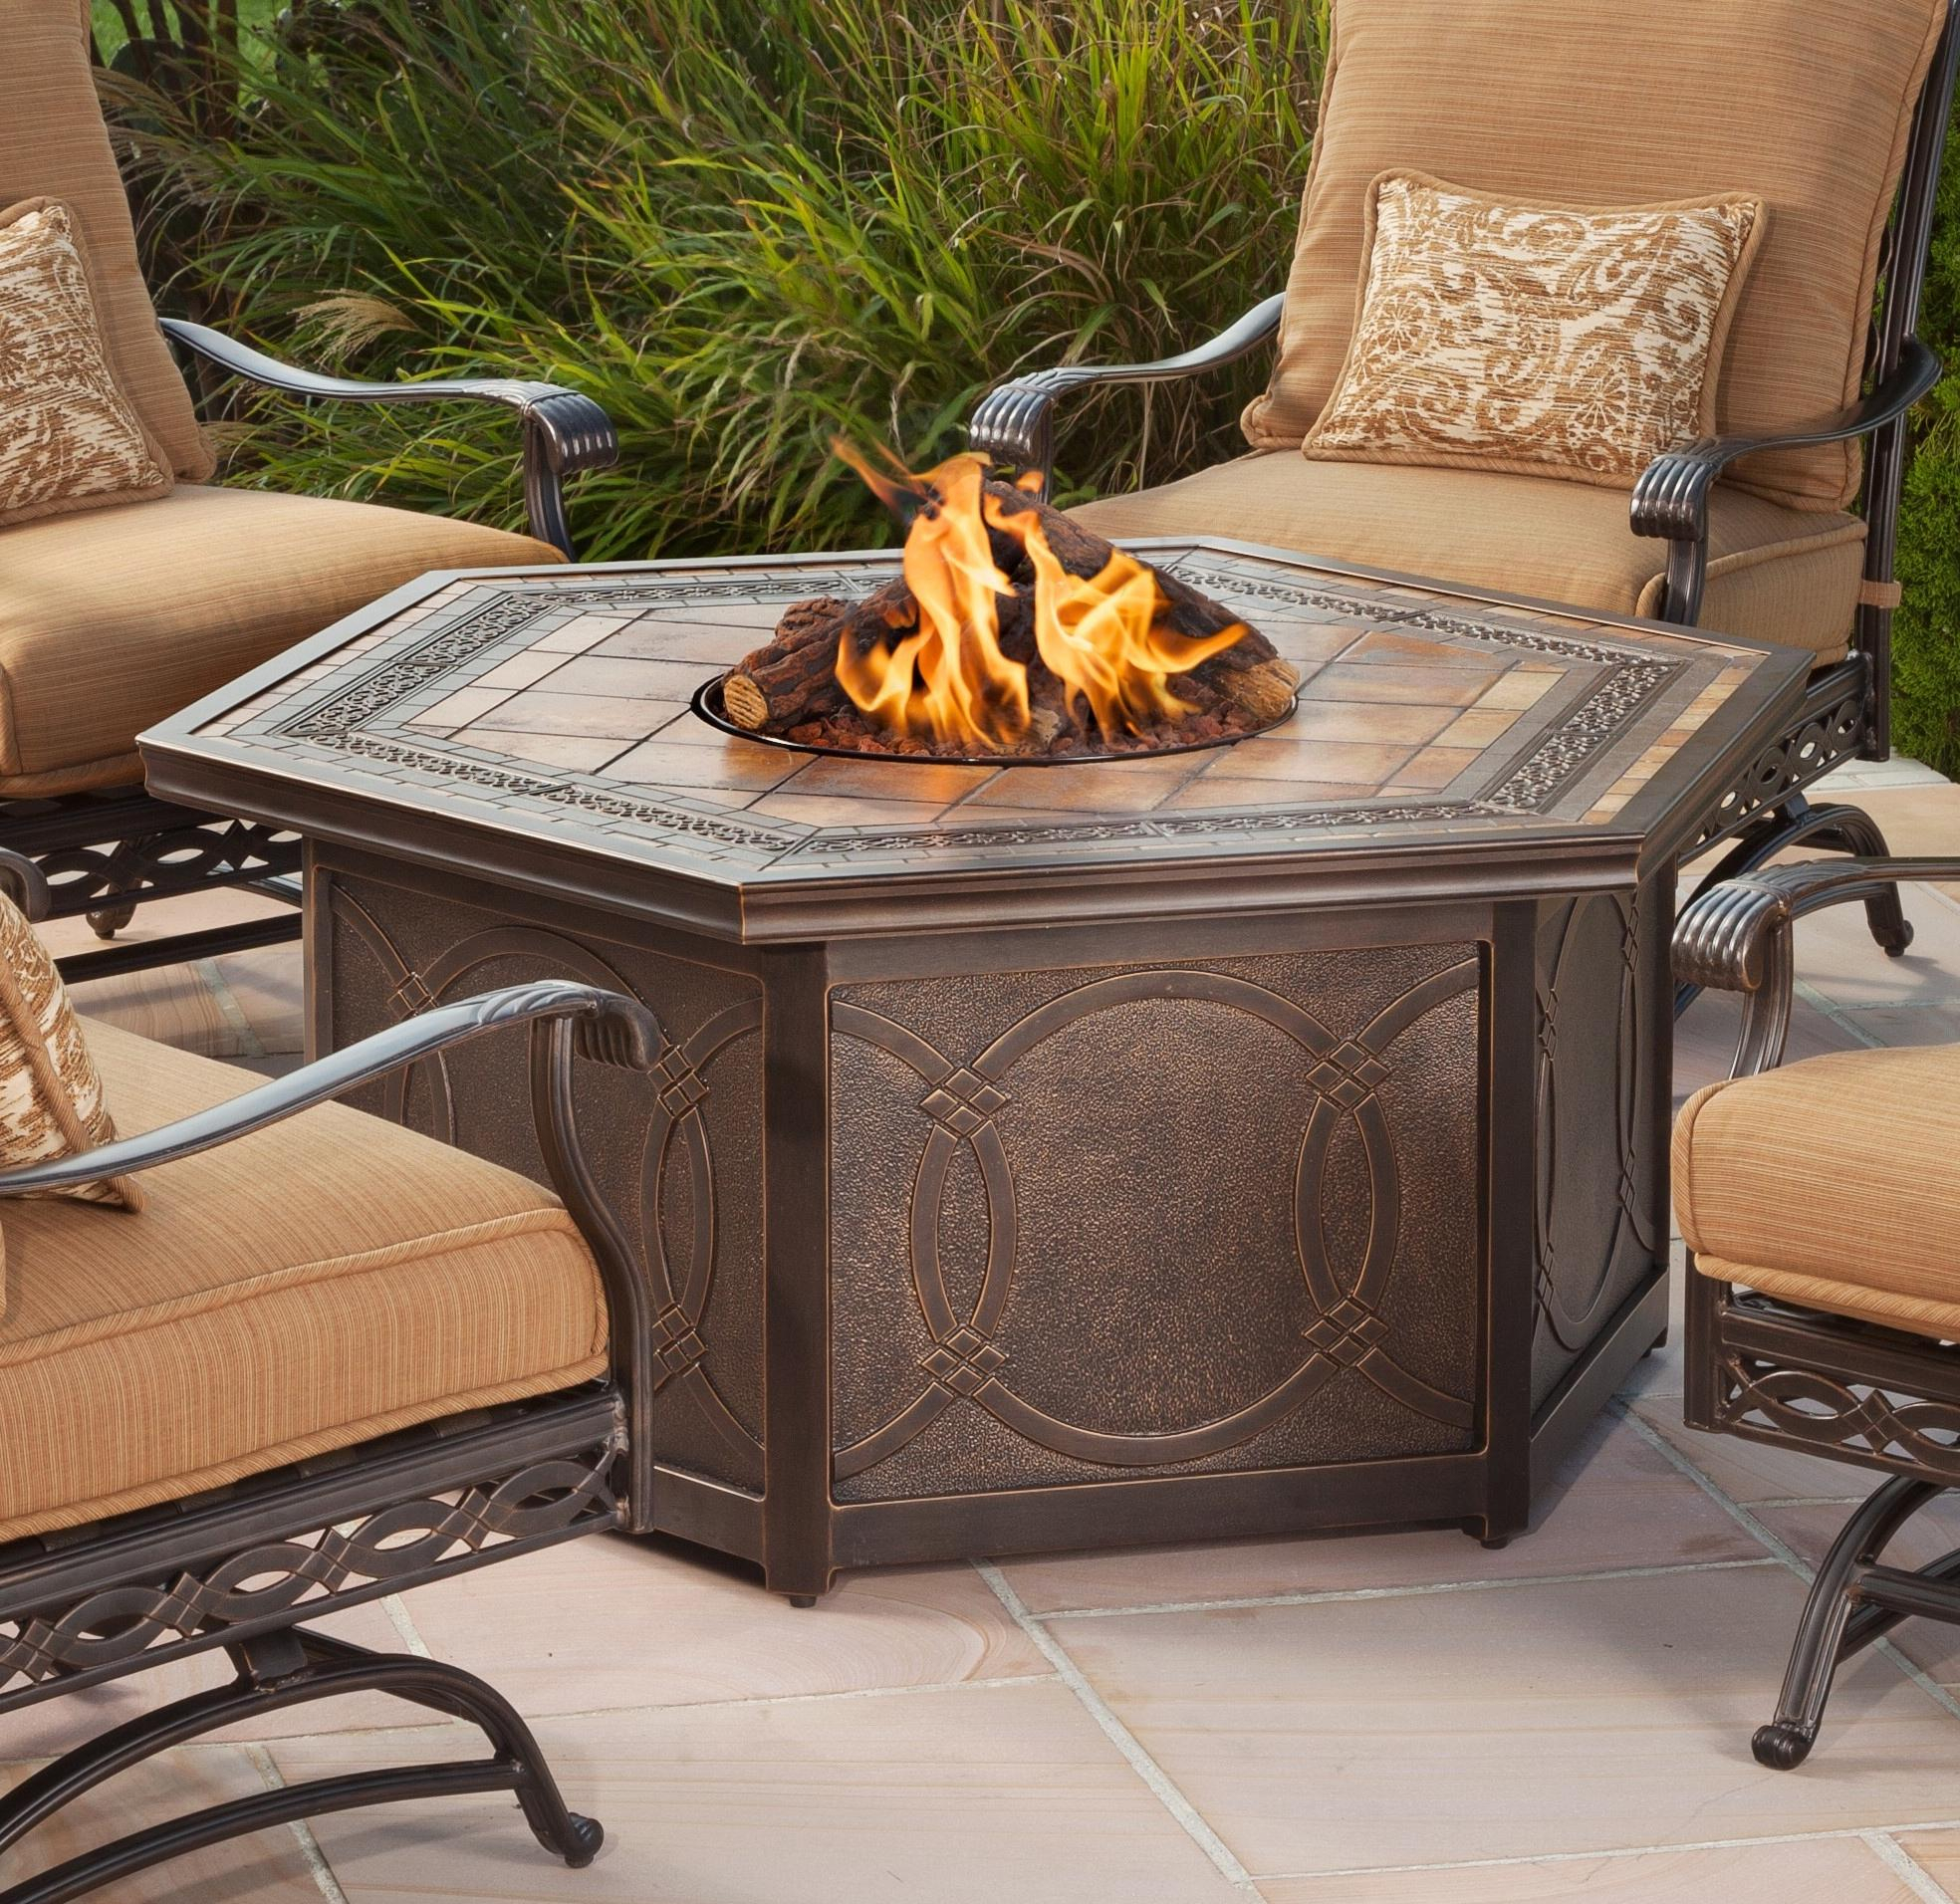 Agio Ashmost Hexagonal Cast Aluminum Outdoor Firepit Chat Table With for size 1968 X 1912